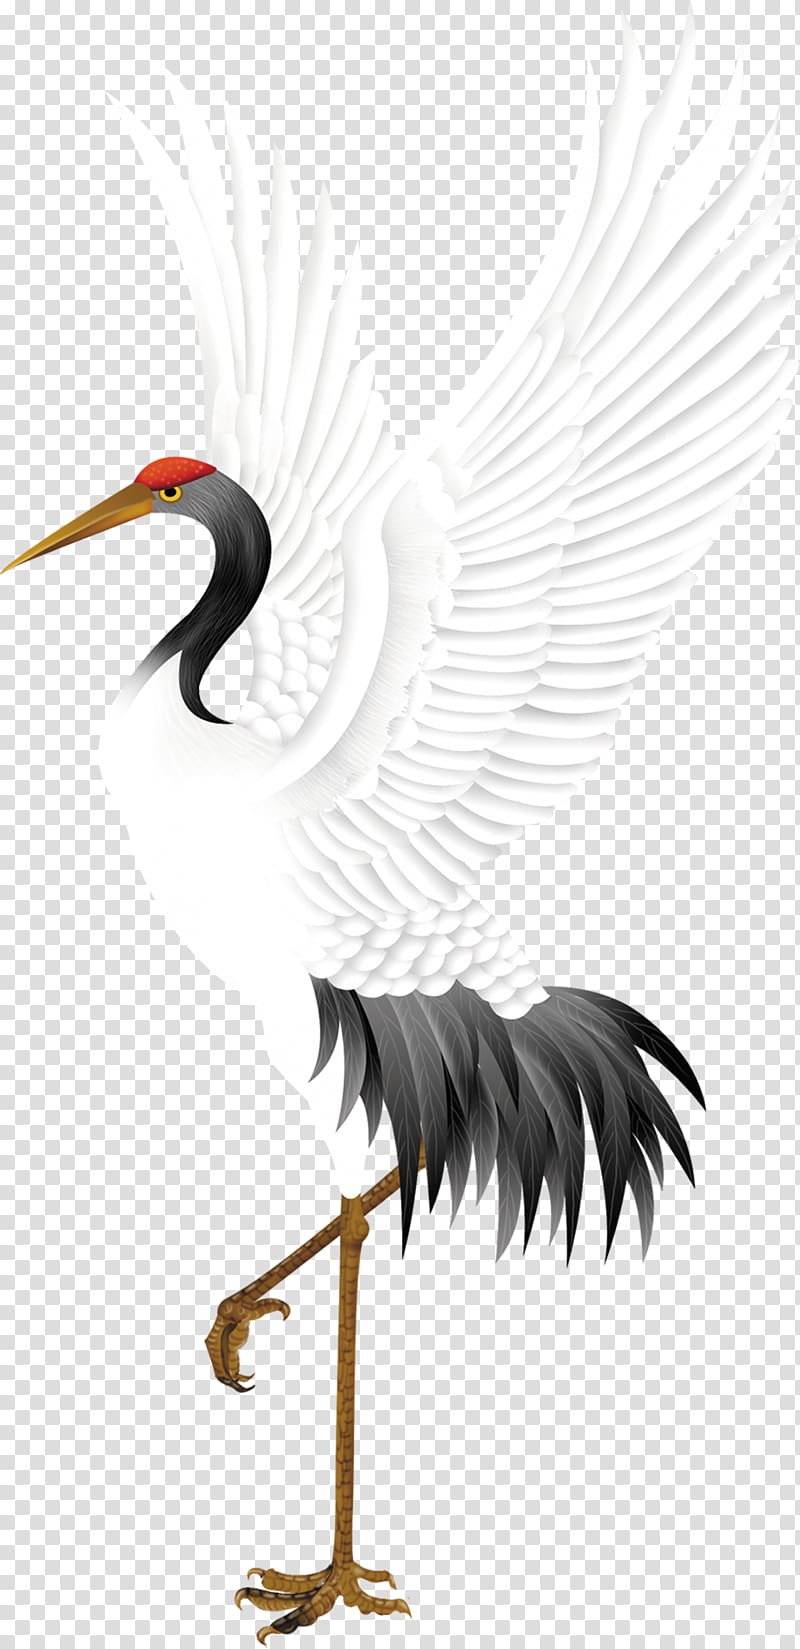 Red-crowned crane Bird Stork, Wings of the crane transparent background PNG clipart